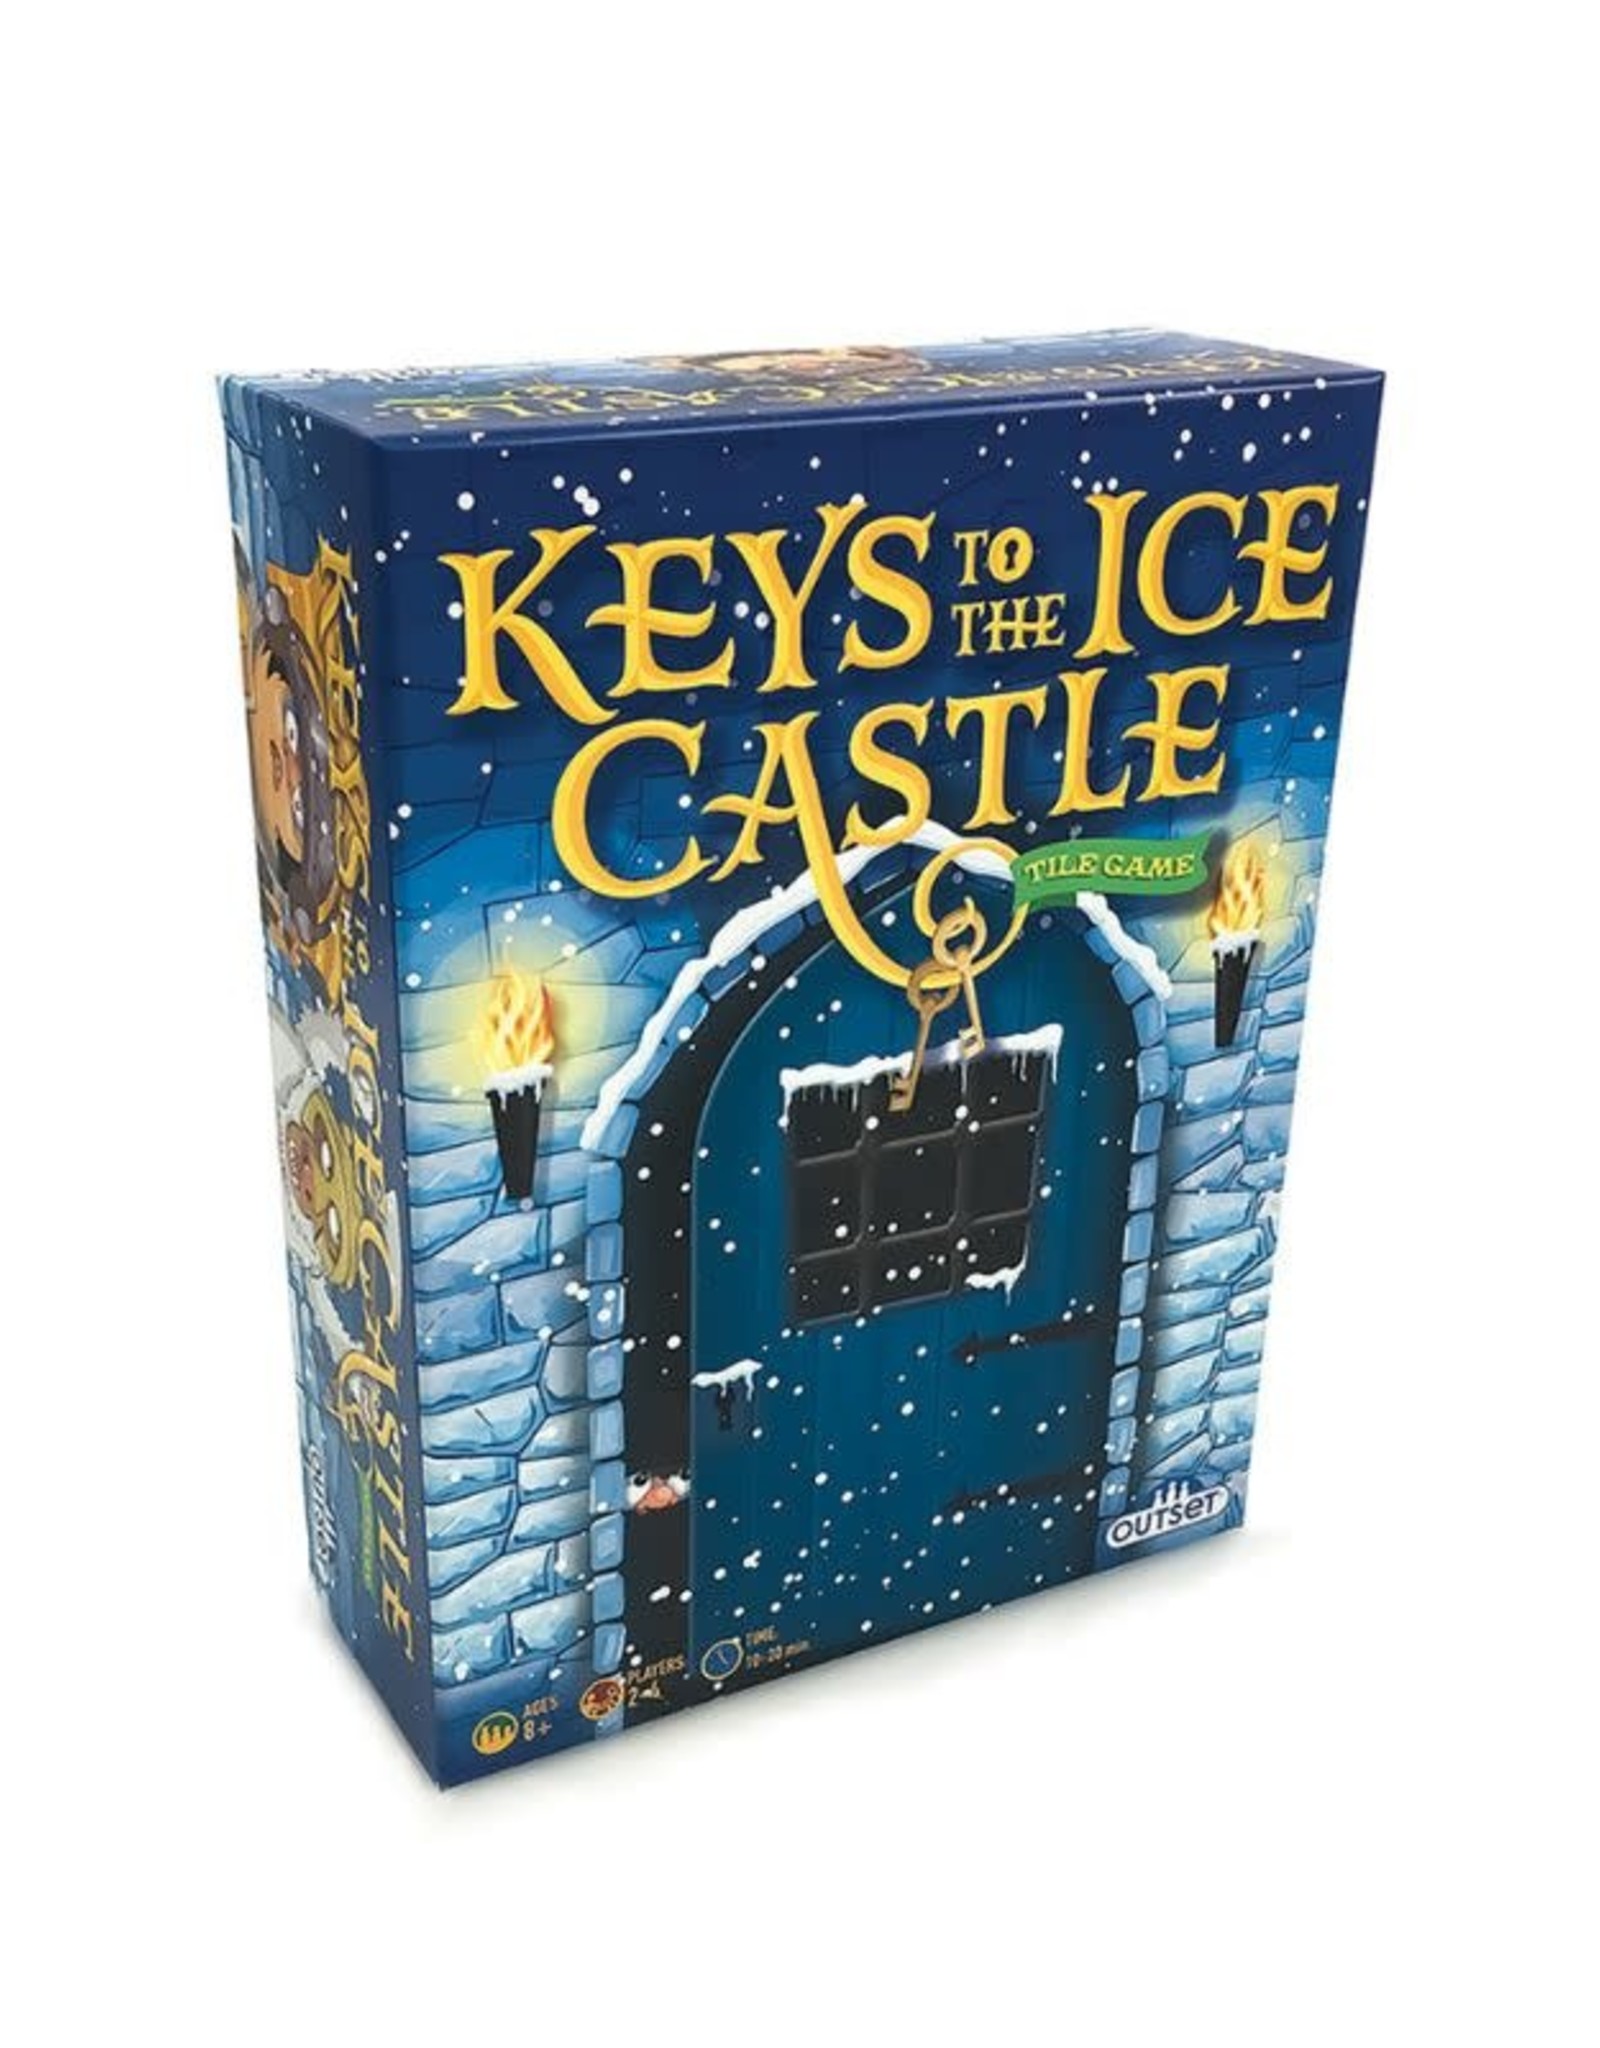 Keys to the Ice Castle Deluxe Edition